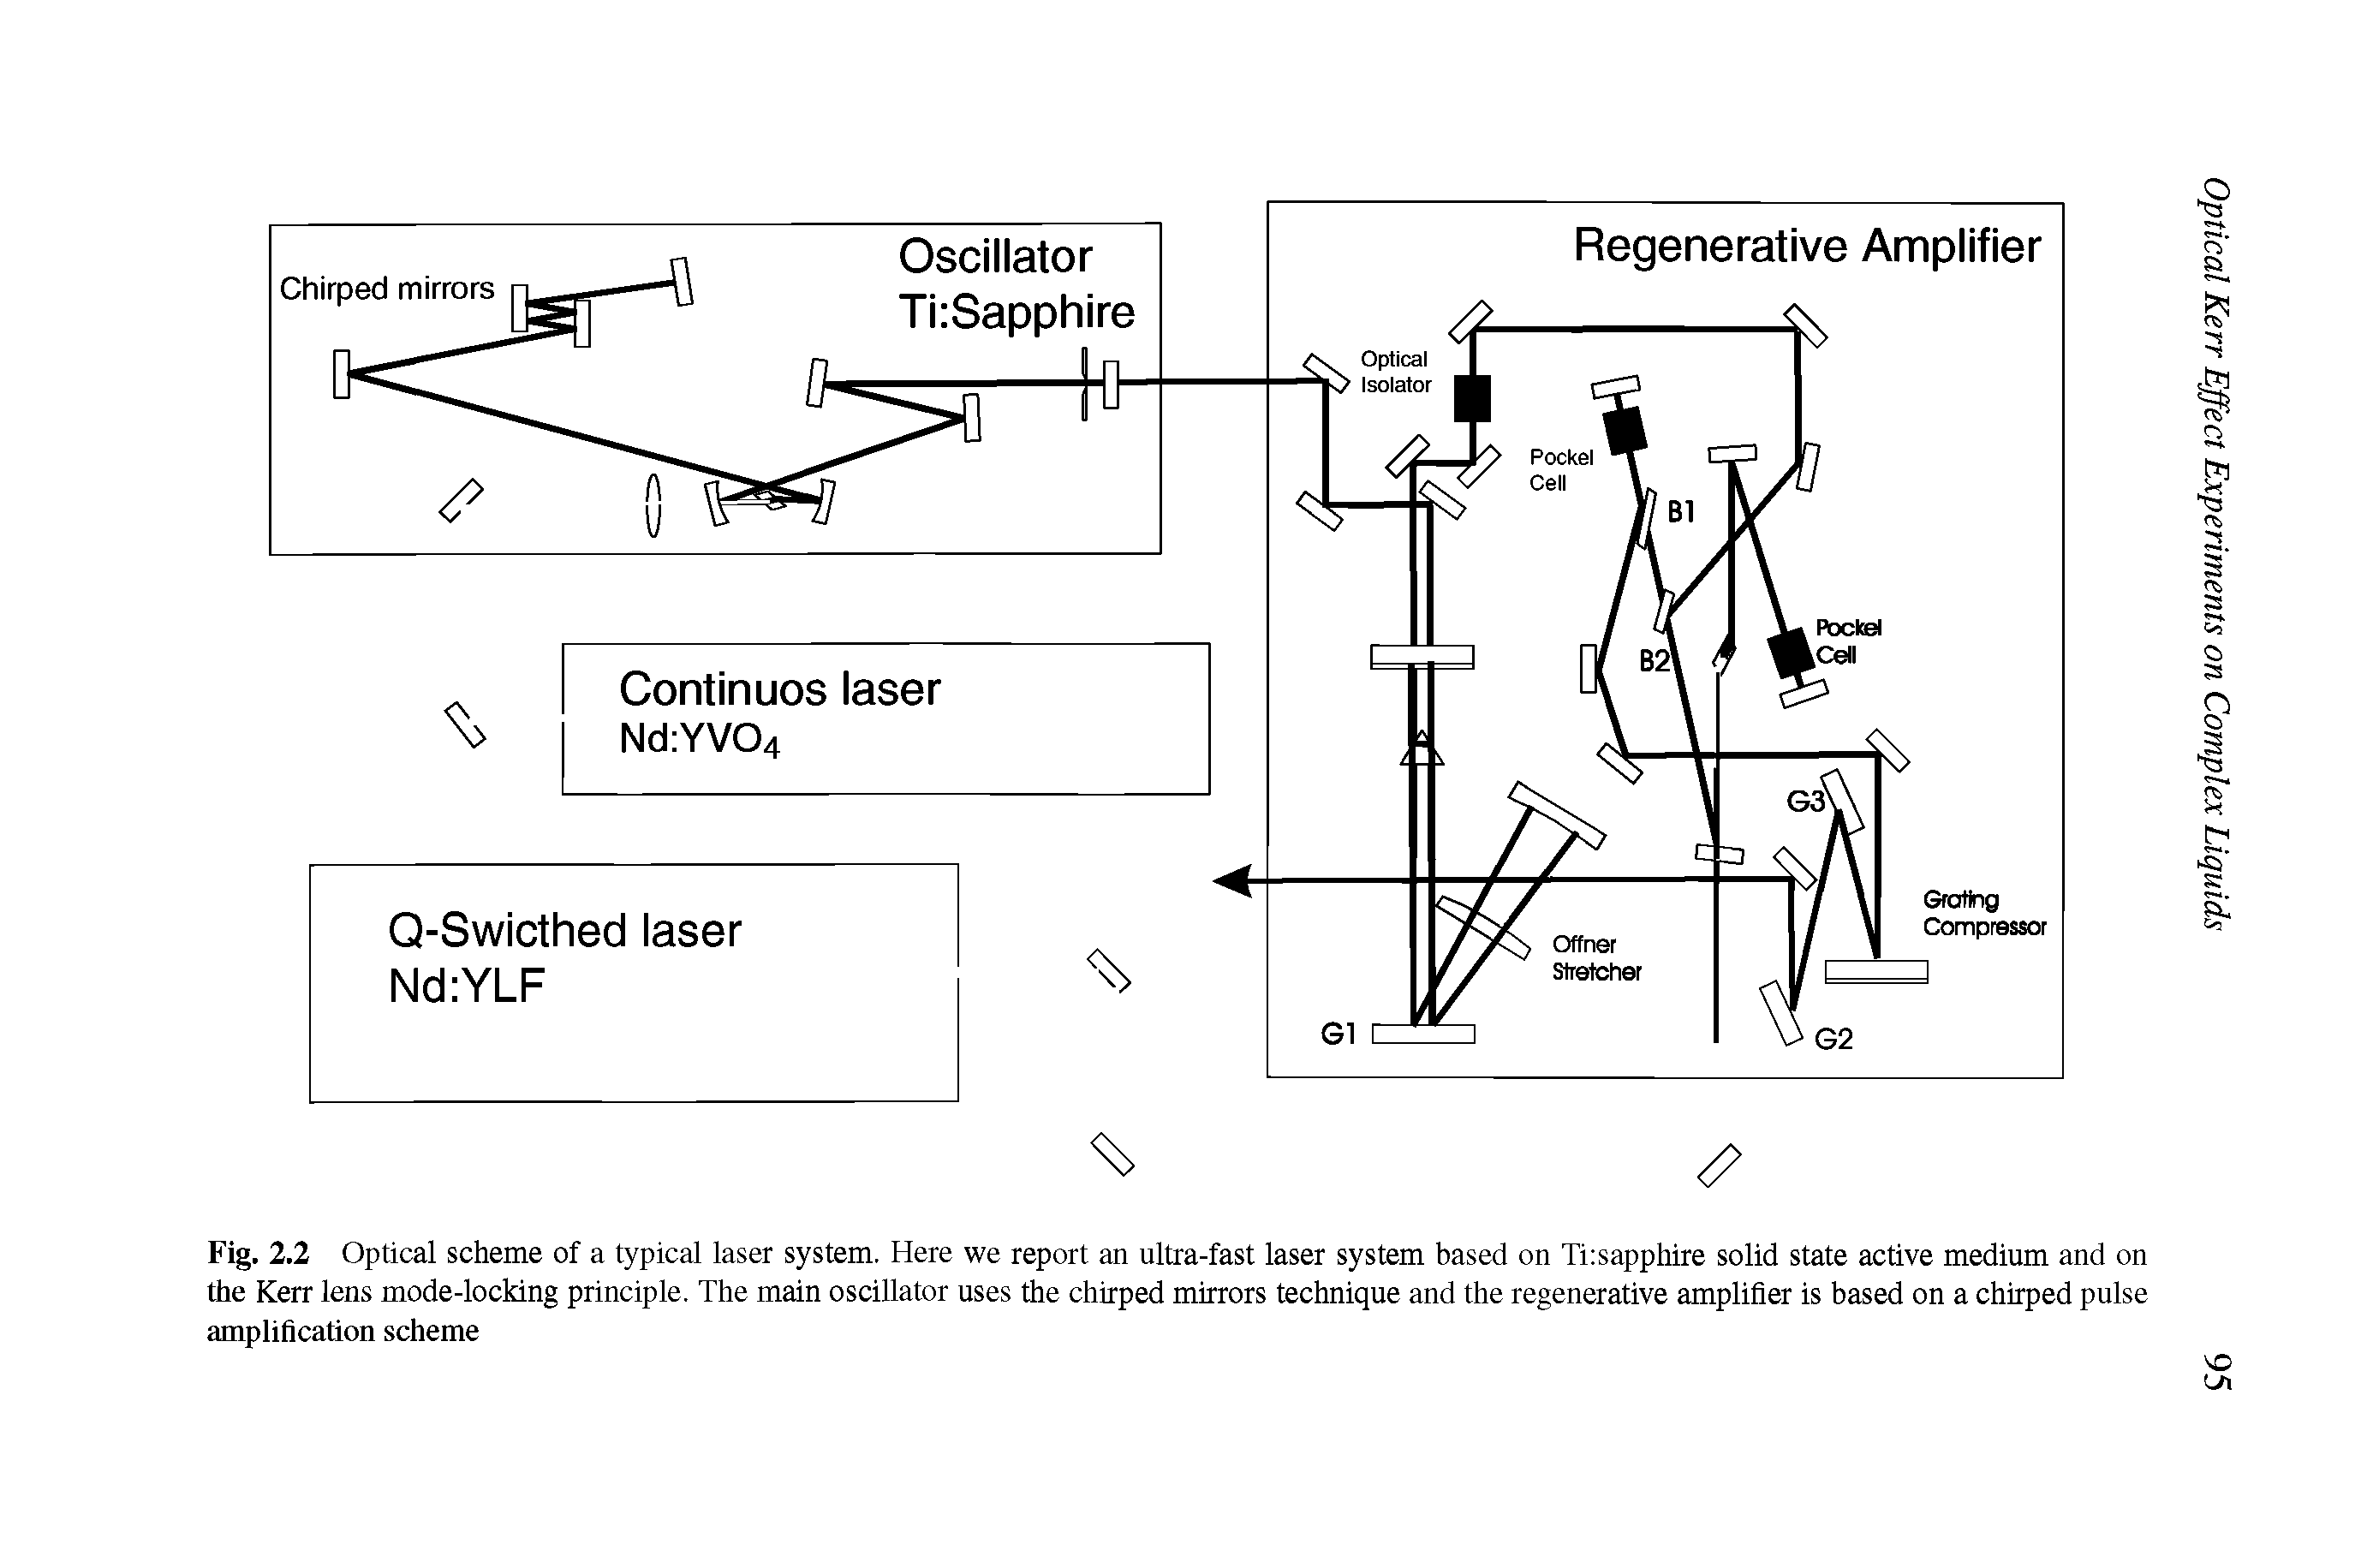 Fig. 2.2 Optical scheme of a typical laser system. Here we report an ultra-fast laser system based on Ti sapphire solid state active medium and on the Kerr lens mode-locking principle. The main oscillator uses the chirped mirrors technique and the regenerative amplifier is based on a chirped pulse amplification scheme...